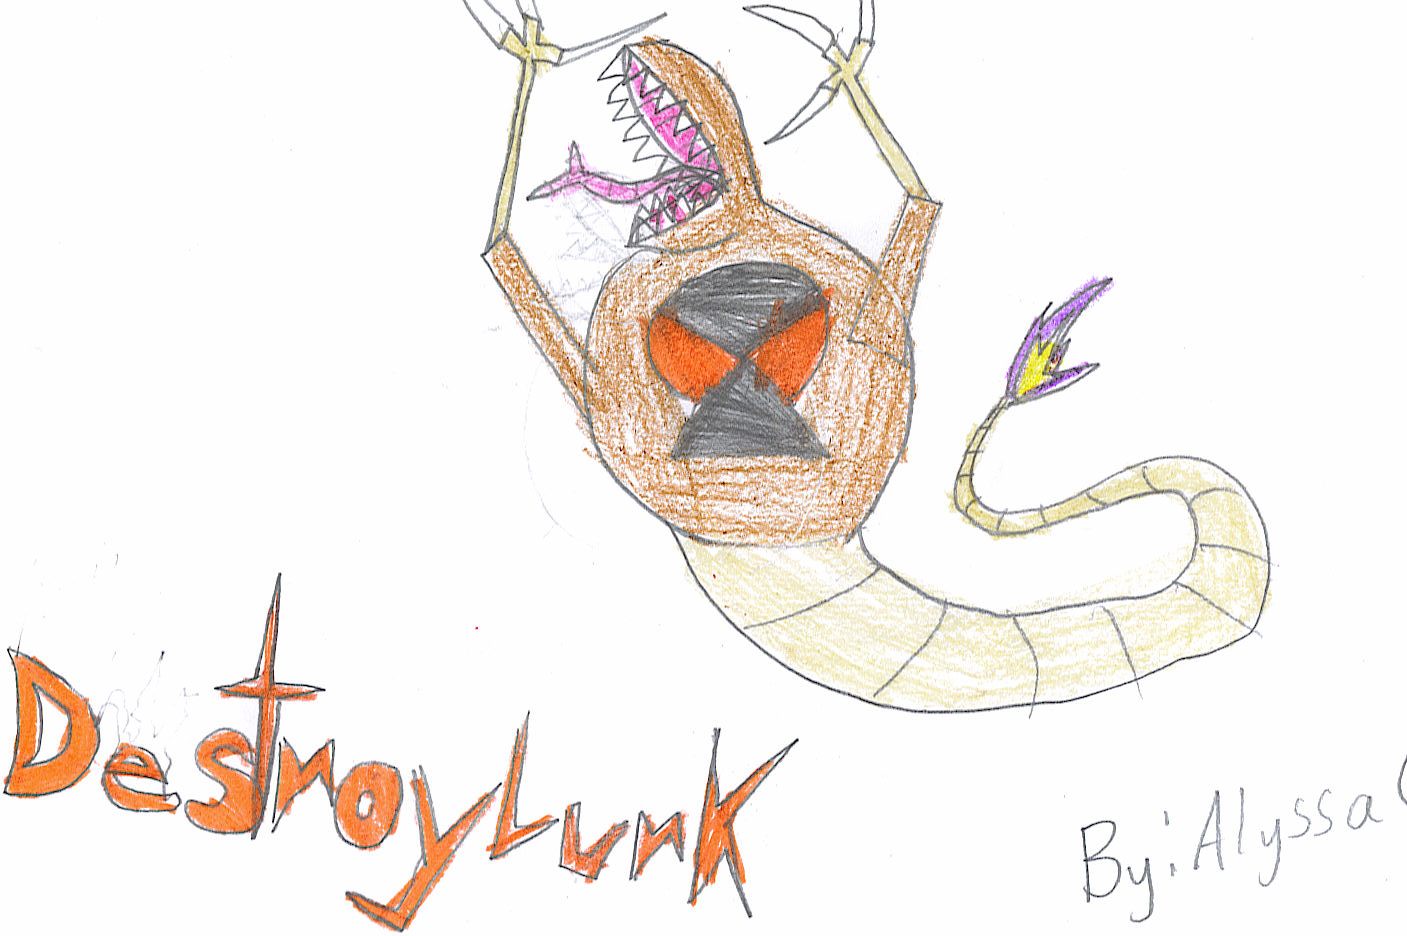 Destroylurk! Gift for Evil_with_you by AlyssaC